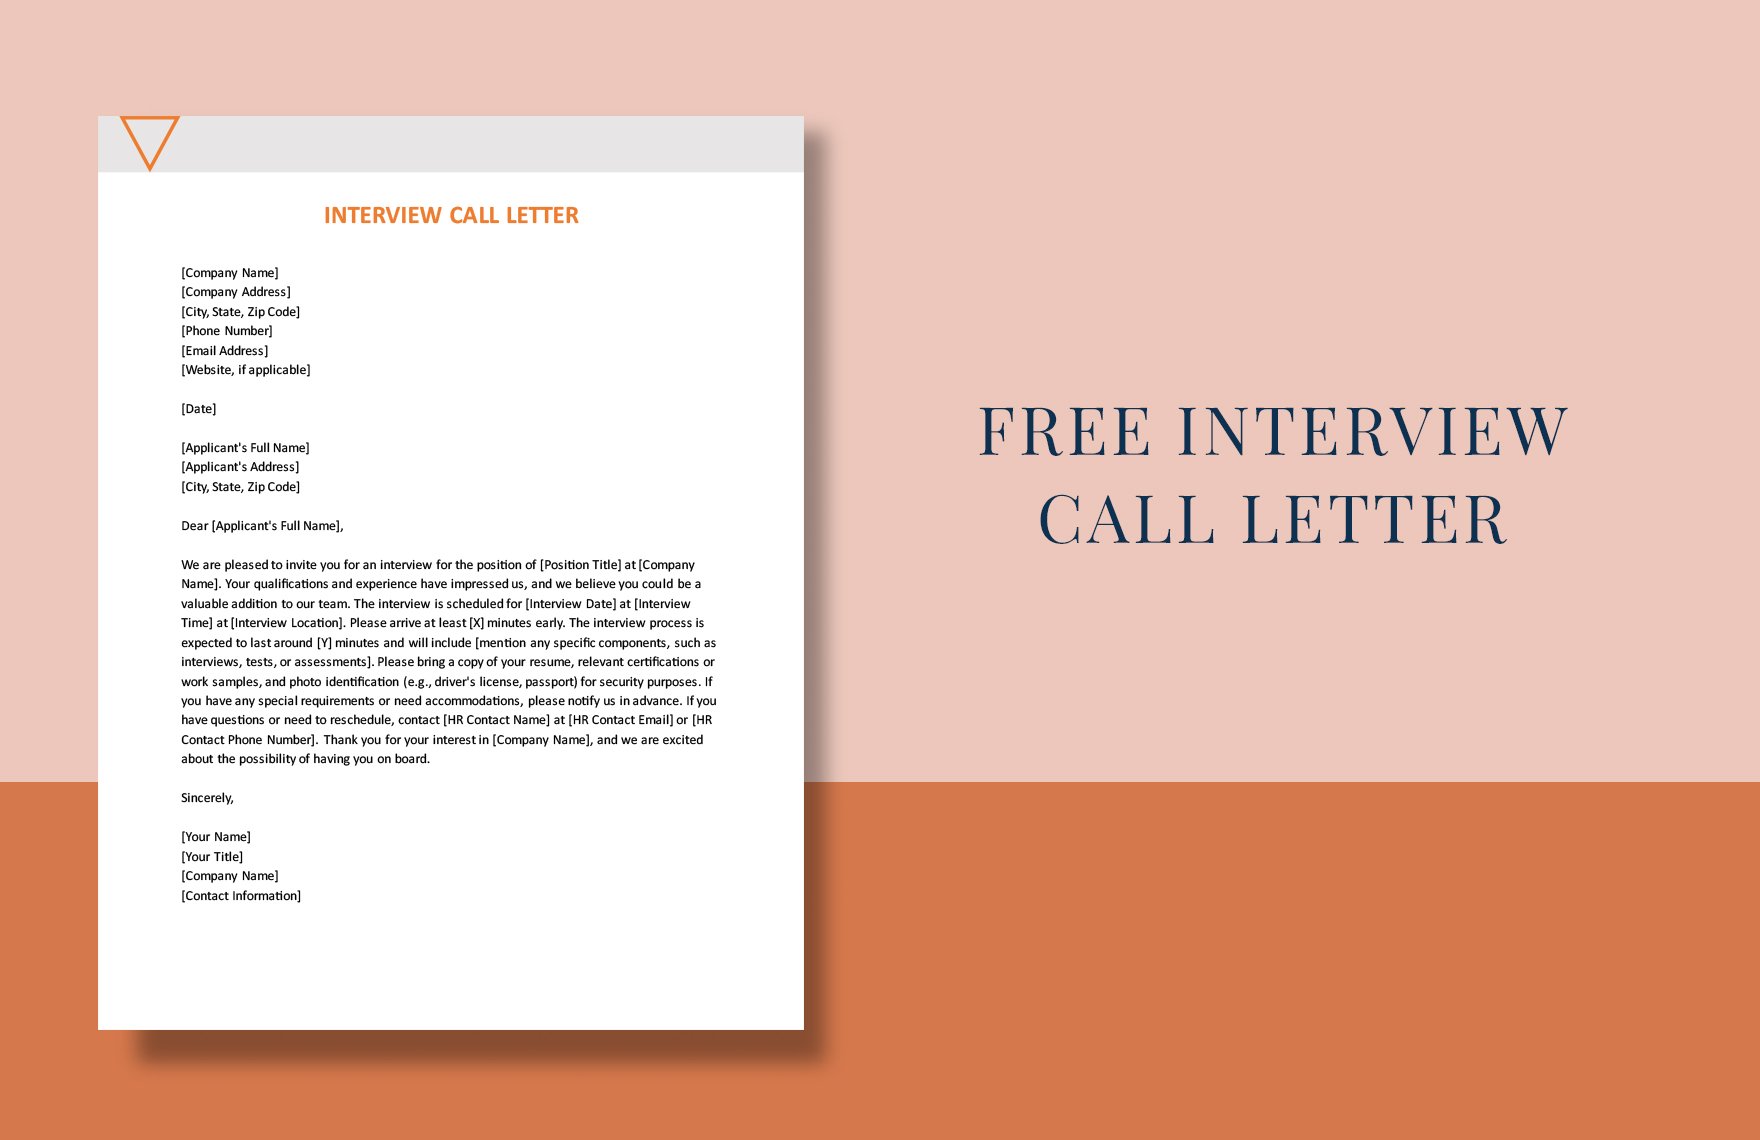 Free Interview Call Letter